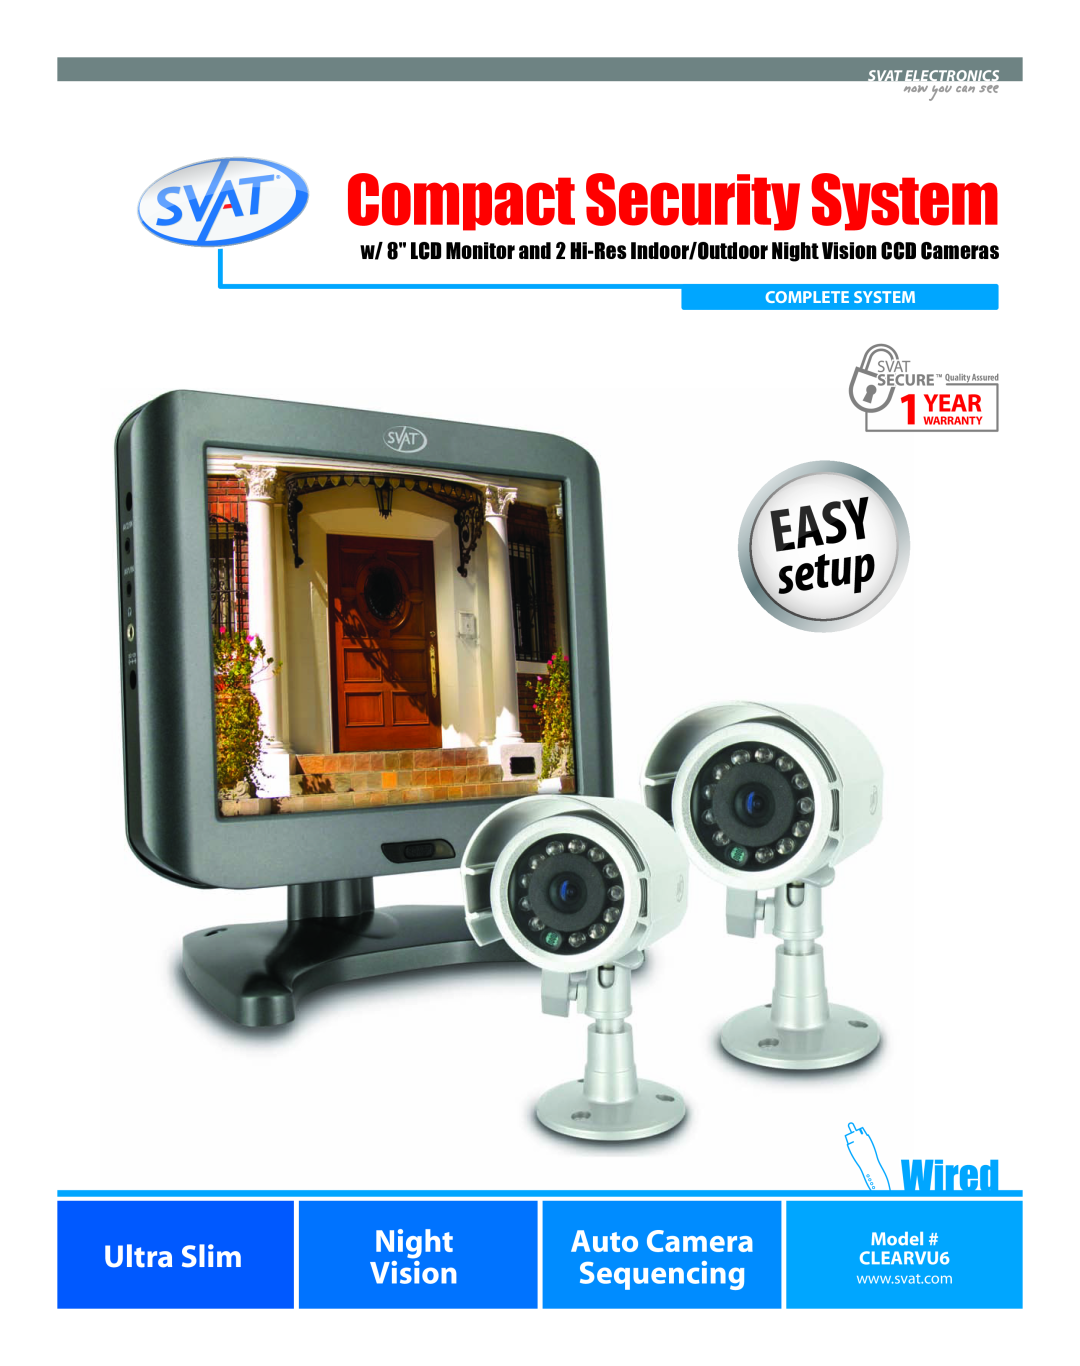 SVAT Electronics warranty Model # CLEARVU6, Compact Security System, Ultra Slim, Night, Auto Camera, Vision, Sequencing 